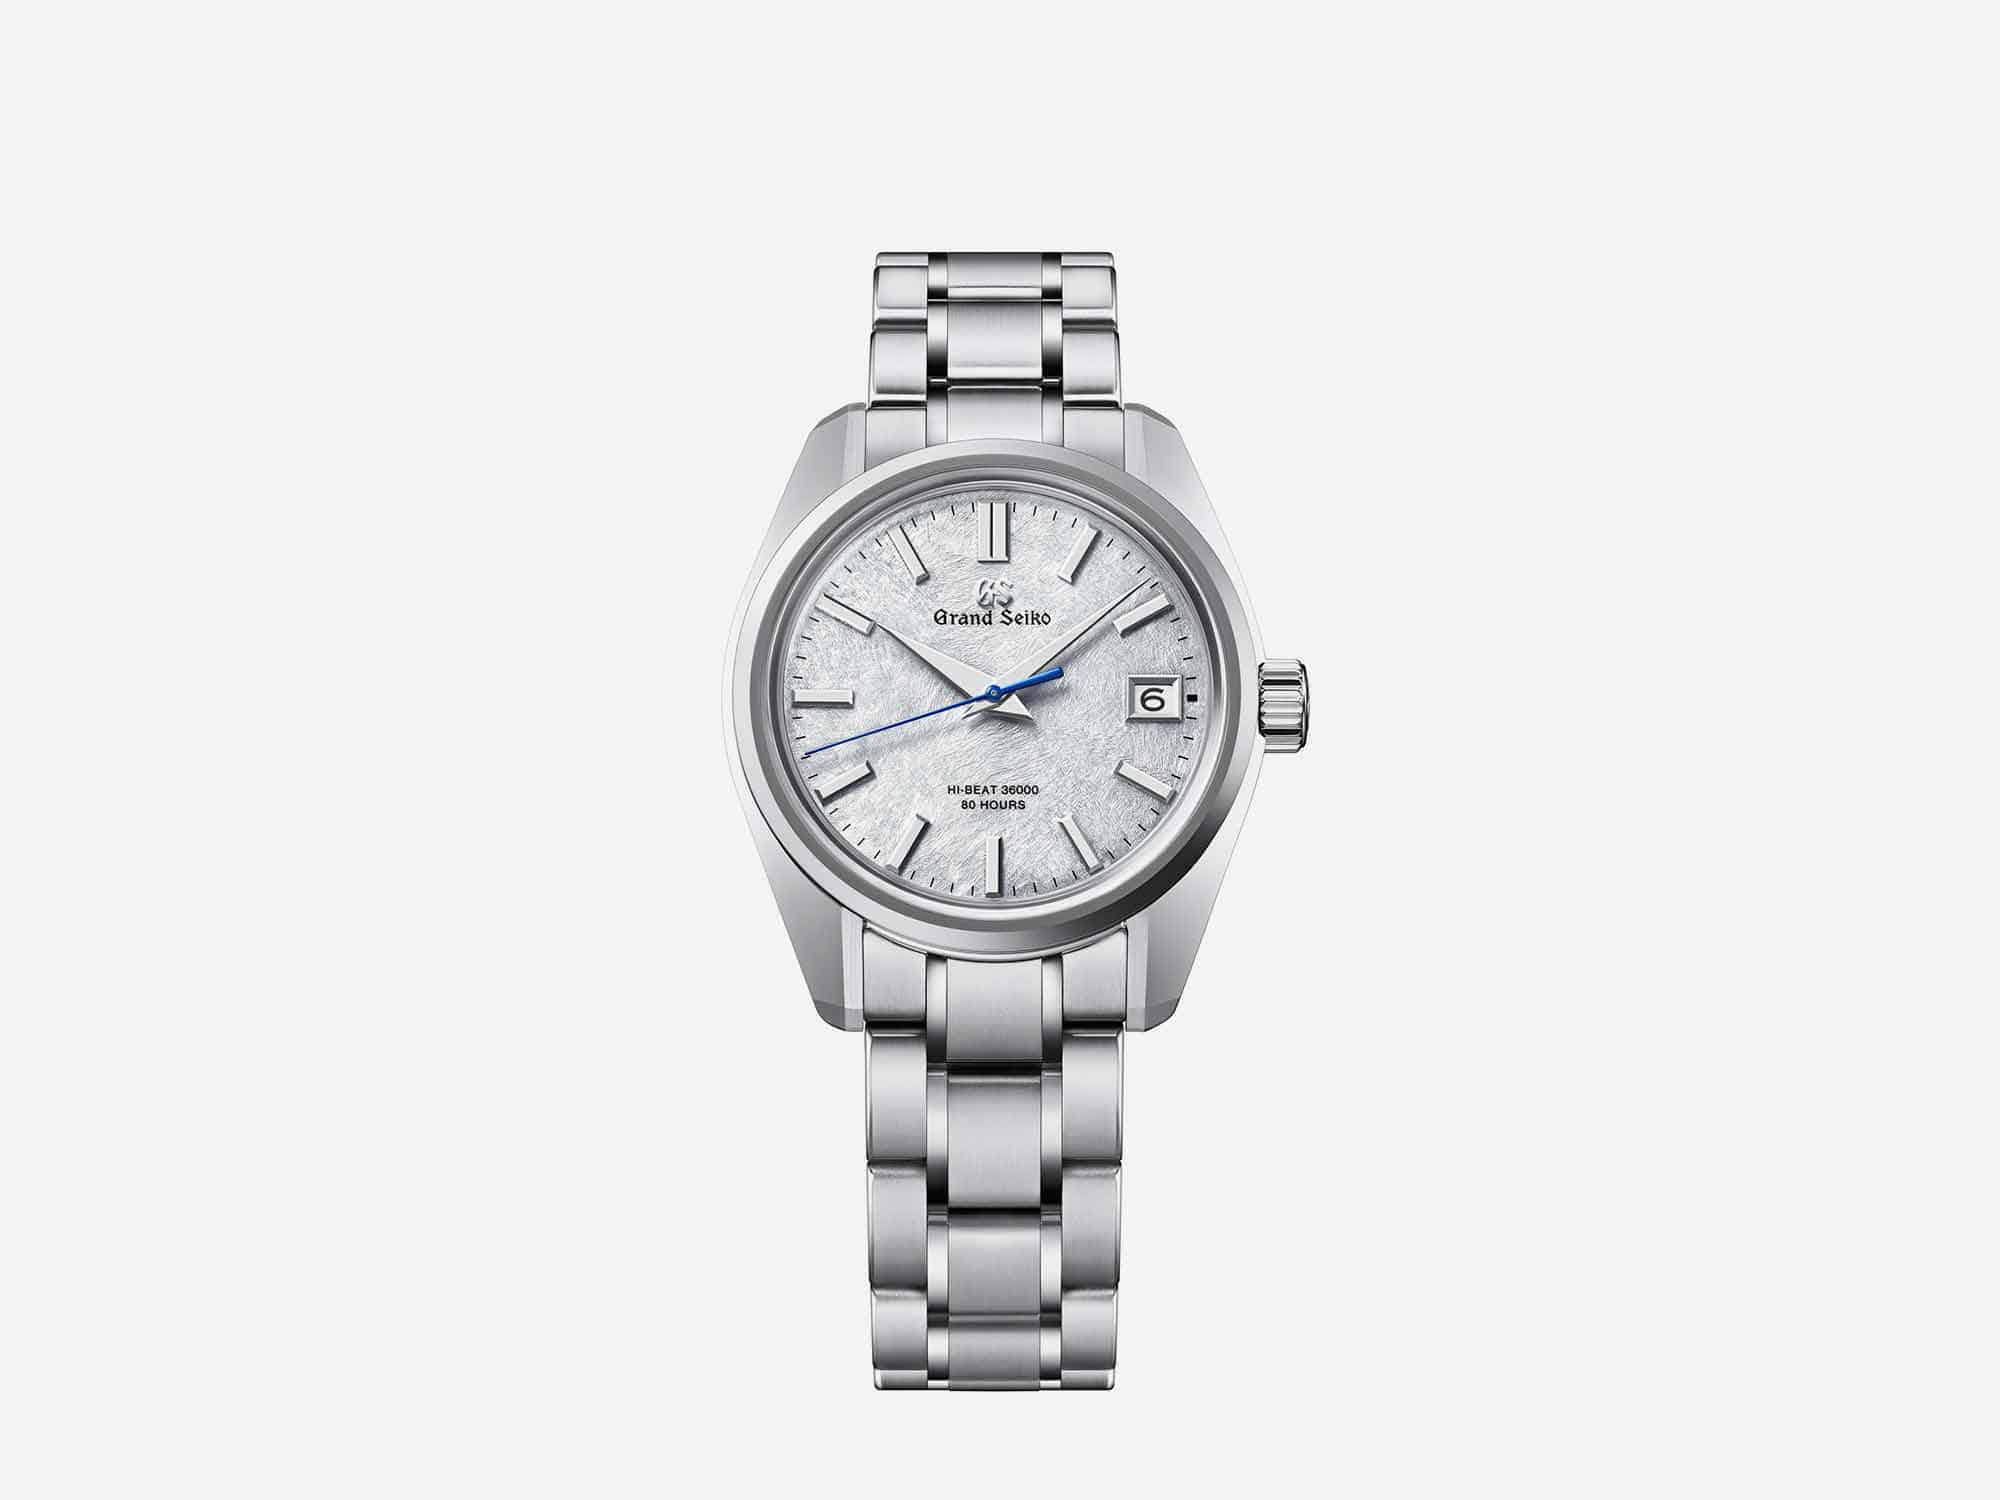 Grand Seiko Announces the SLGH013, Part of their 44GS Anniversary  Celebration and Featuring an Ever-Brilliant Steel Case and Bracelet - Worn  & Wound